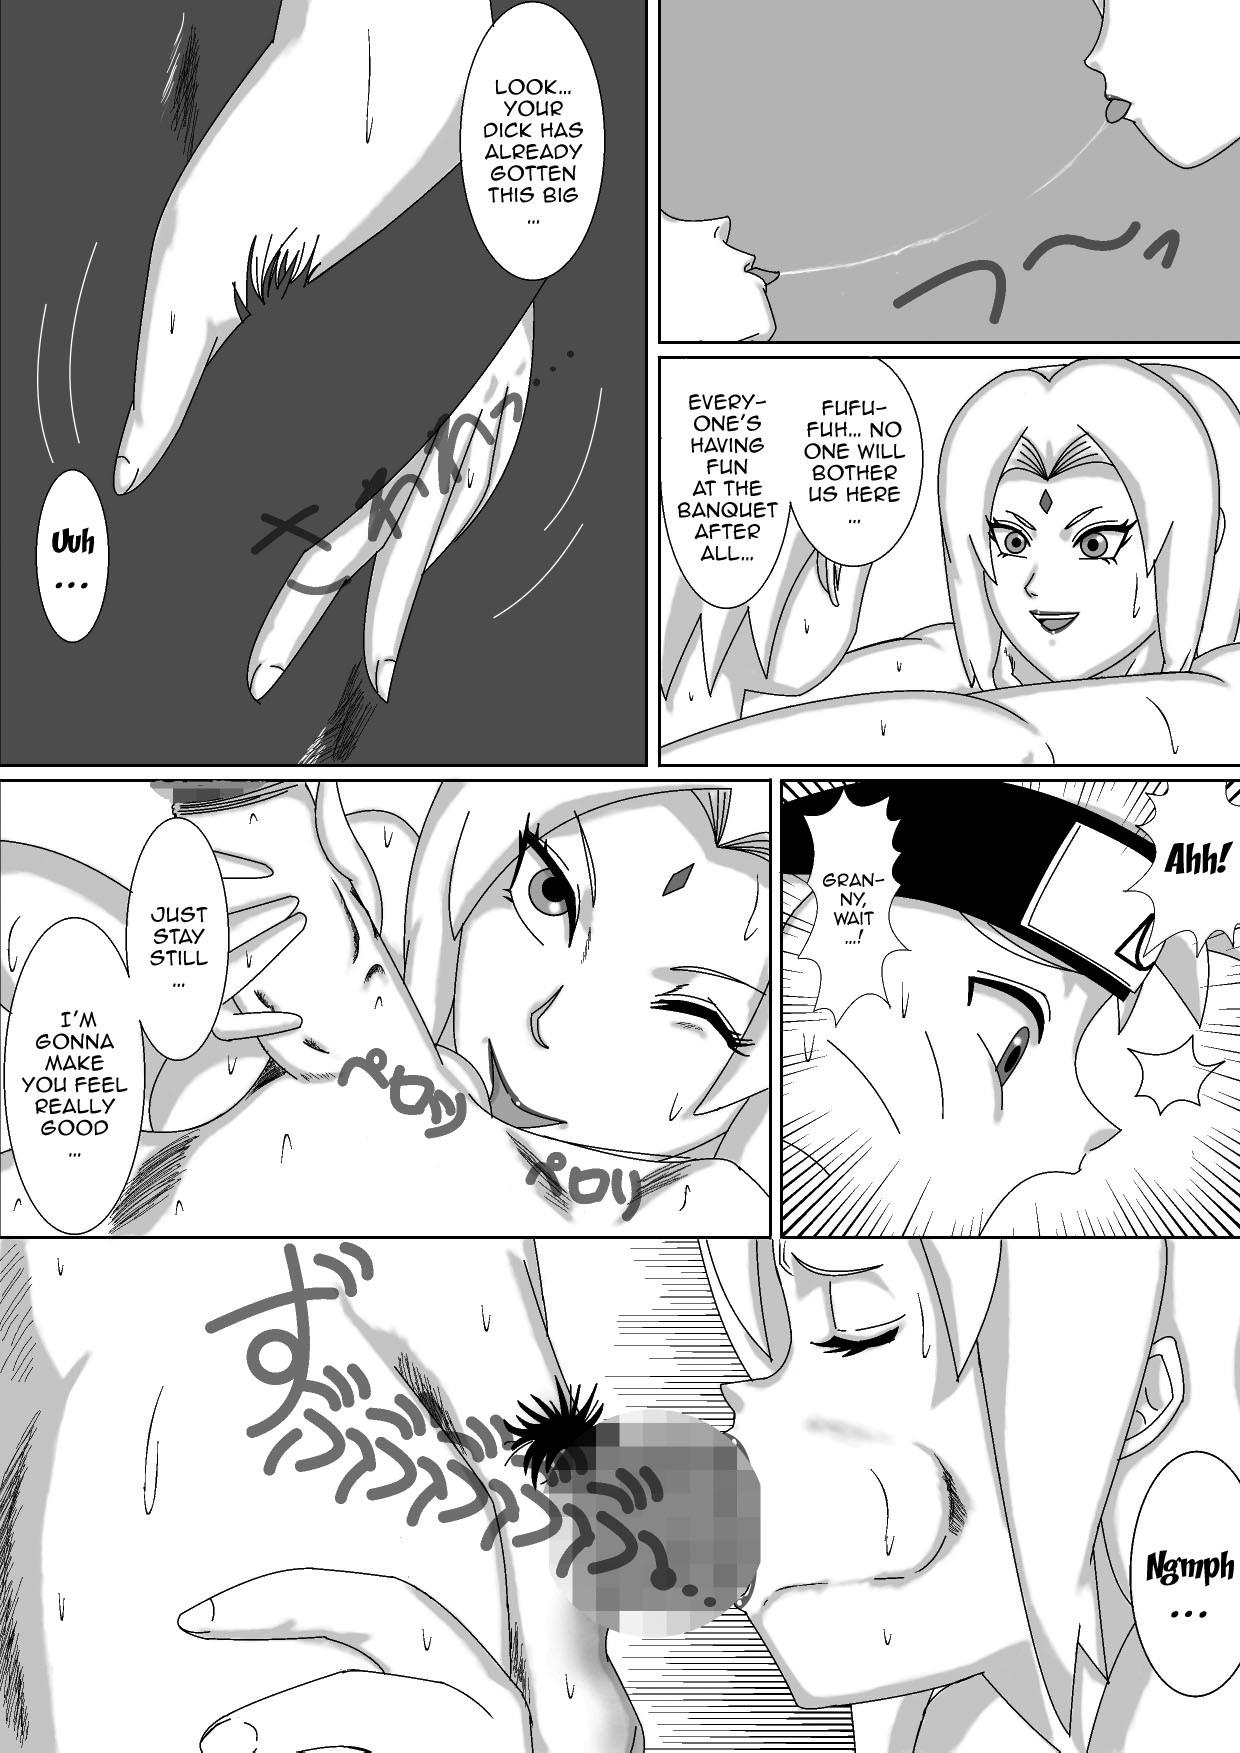 Cock Suckers Nomisugite Deisui Shita BBA to Yarimakutta Ken!! | The Case Of Having Sex With This Old Lady After She Got Herself Really Drunk - Naruto Thylinh - Page 7